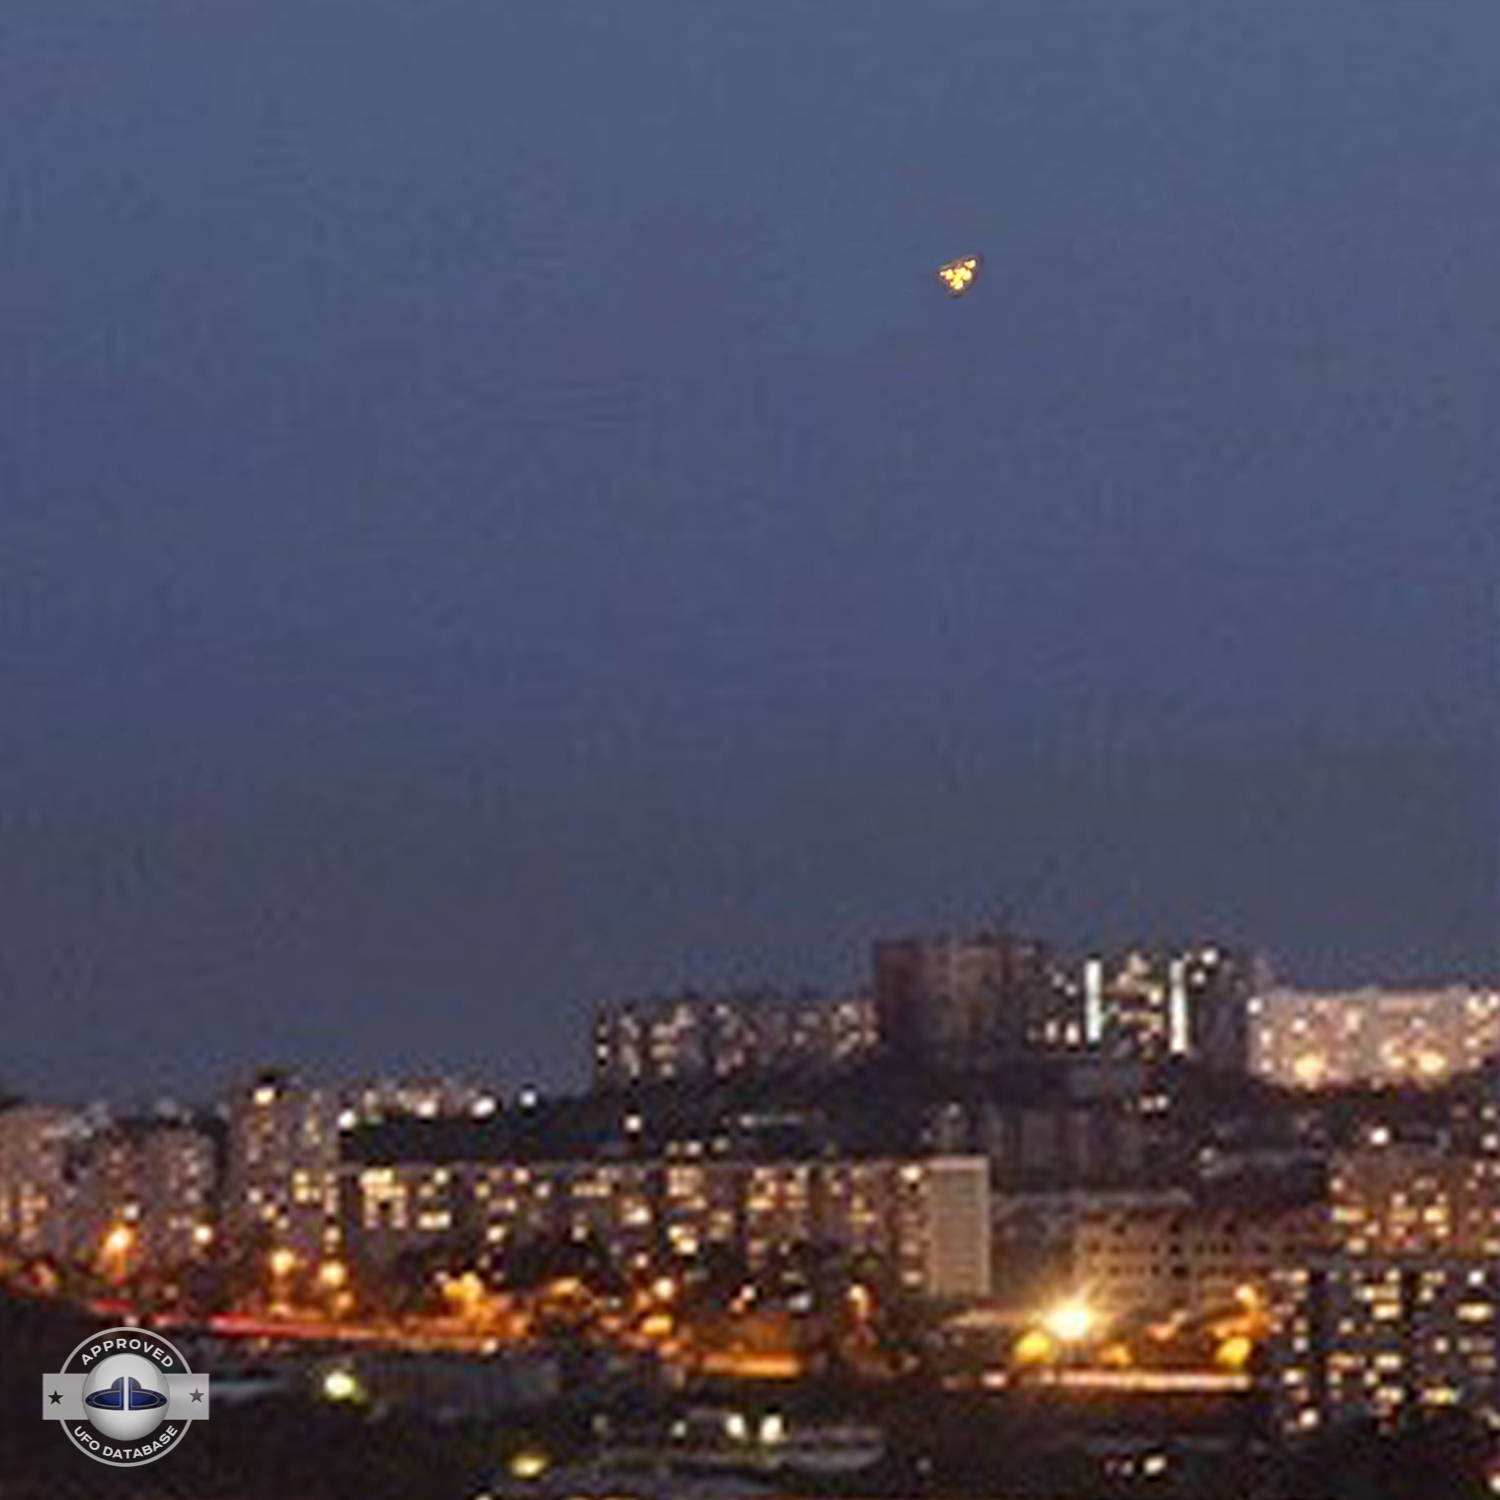 UFO seen by hundreds in Vladivostok | Russia UFO picture | 2010 UFO Picture #167-2